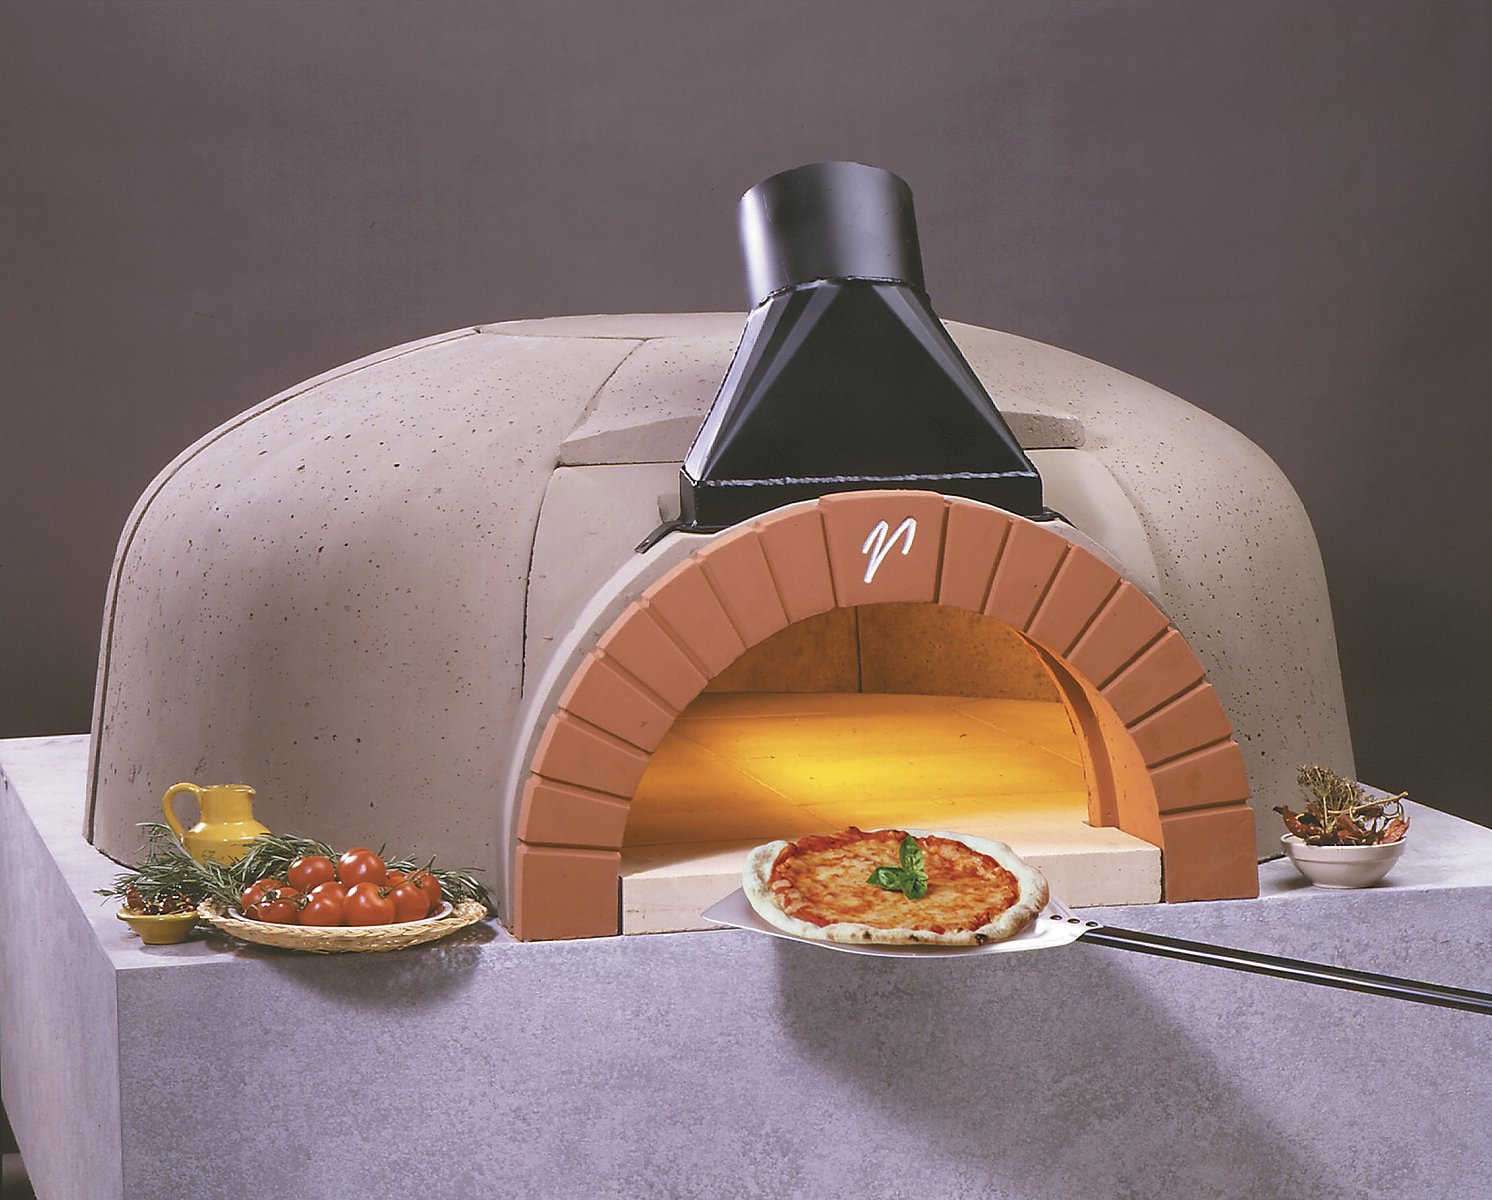 Esperto home-cooks' wood-fired pizza oven from Valoriani UK